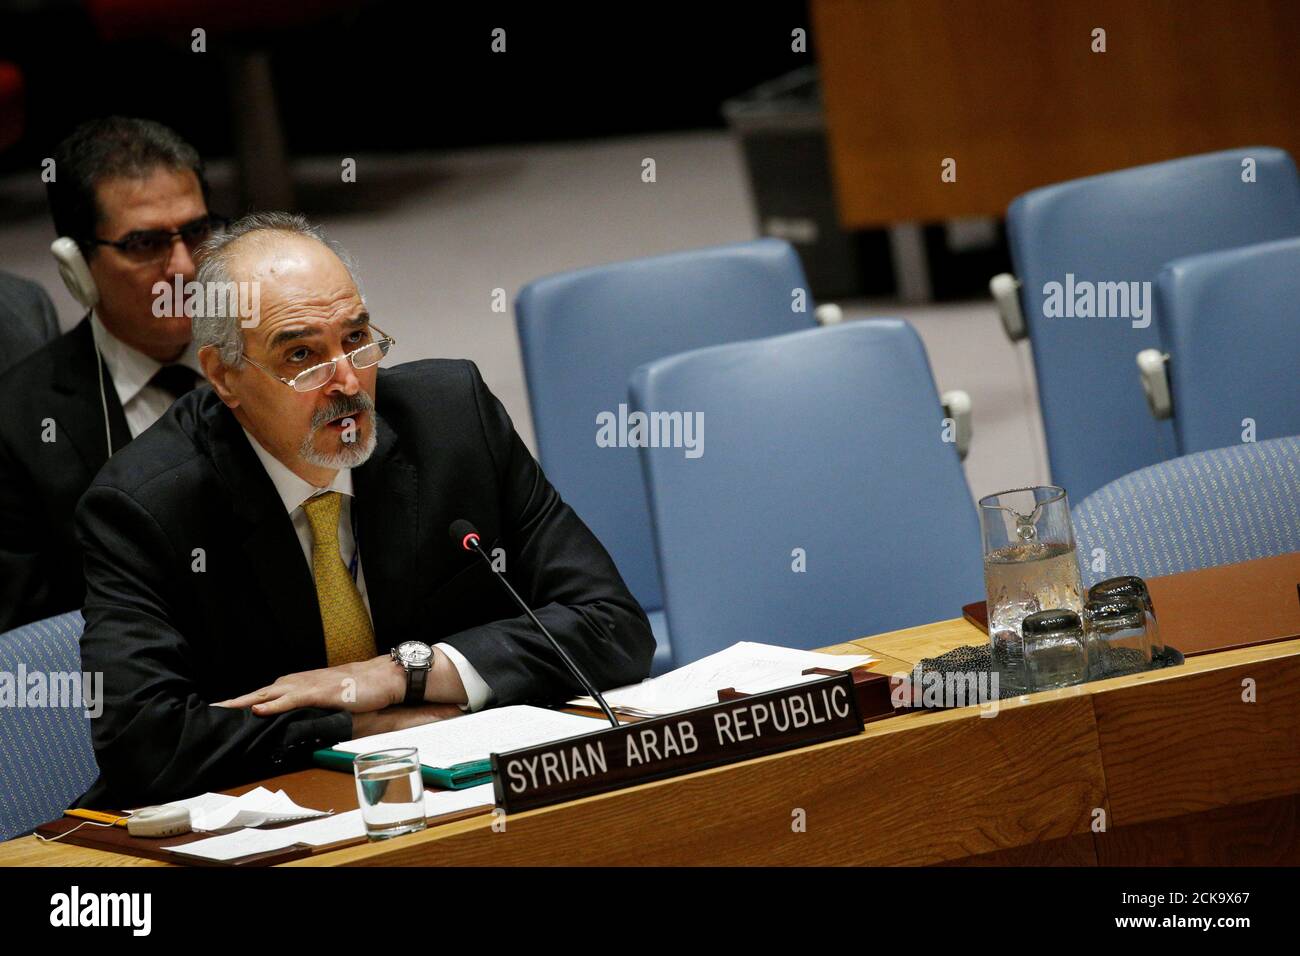 Syrian Arab Republic Ambassador to the U.N. Bashar Jaafari speaks during a UN Security Council meeting on Syria at the United Nations headquarters in New York, U.S., February 22, 2018. REUTERS/Brendan McDermid Stock Photo